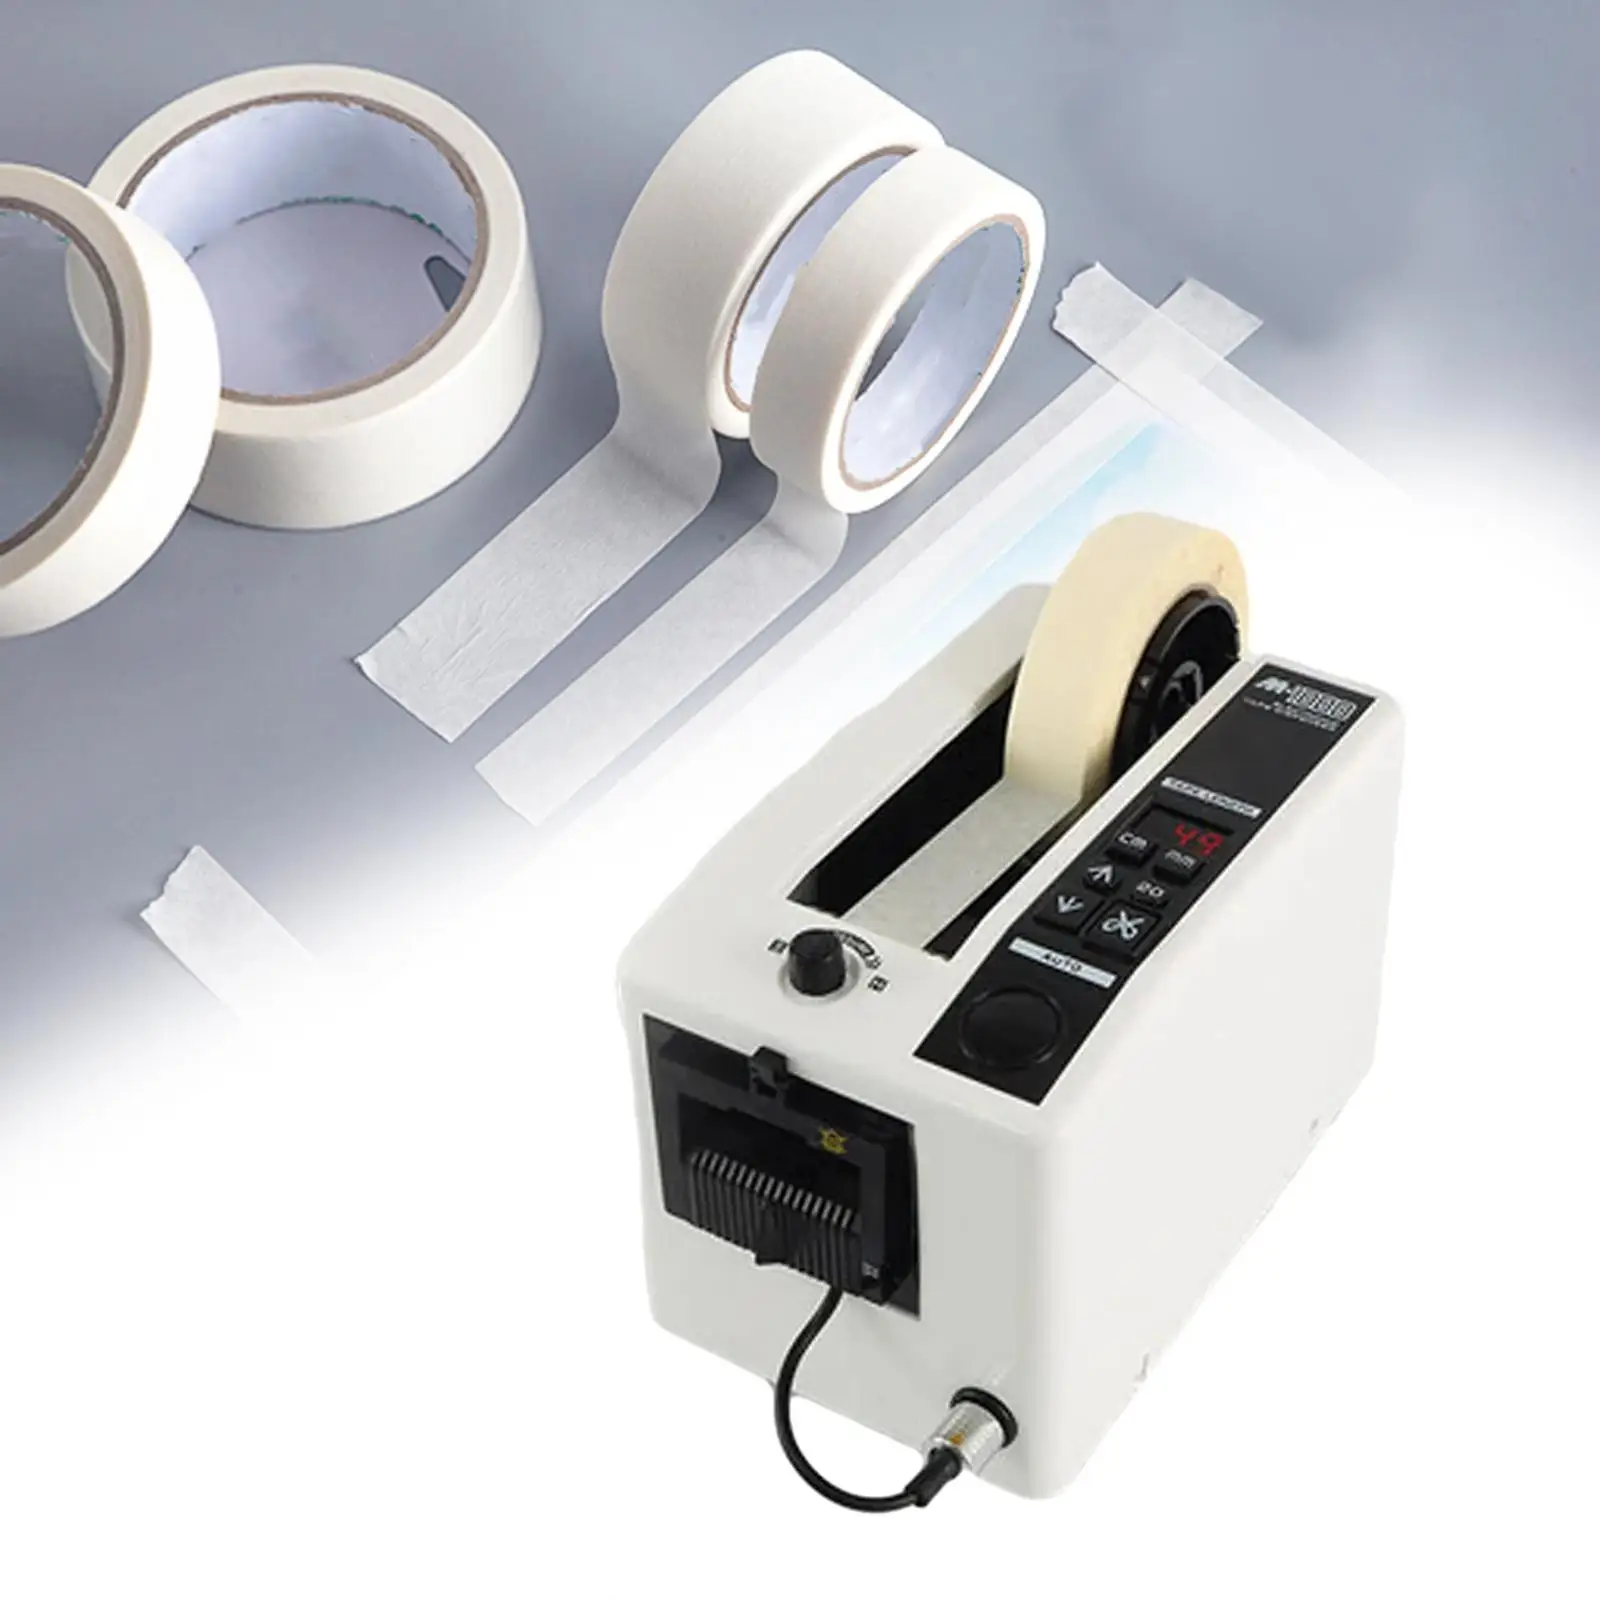 Automatic Tape Dispenser Portable Intelligent Packing Equipment for 6-50mm Width Tapes Scotch Tape Packaging Tape Gift Wrapping